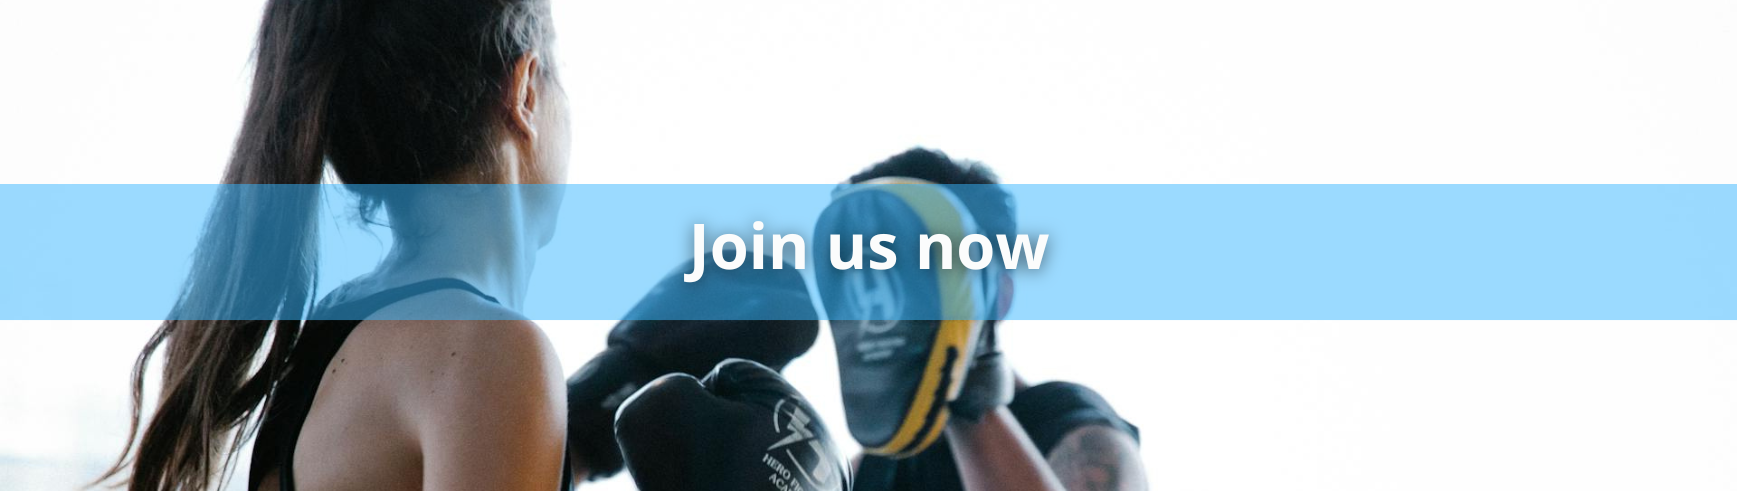 join us now - send an email to kampfsport@gmx.at